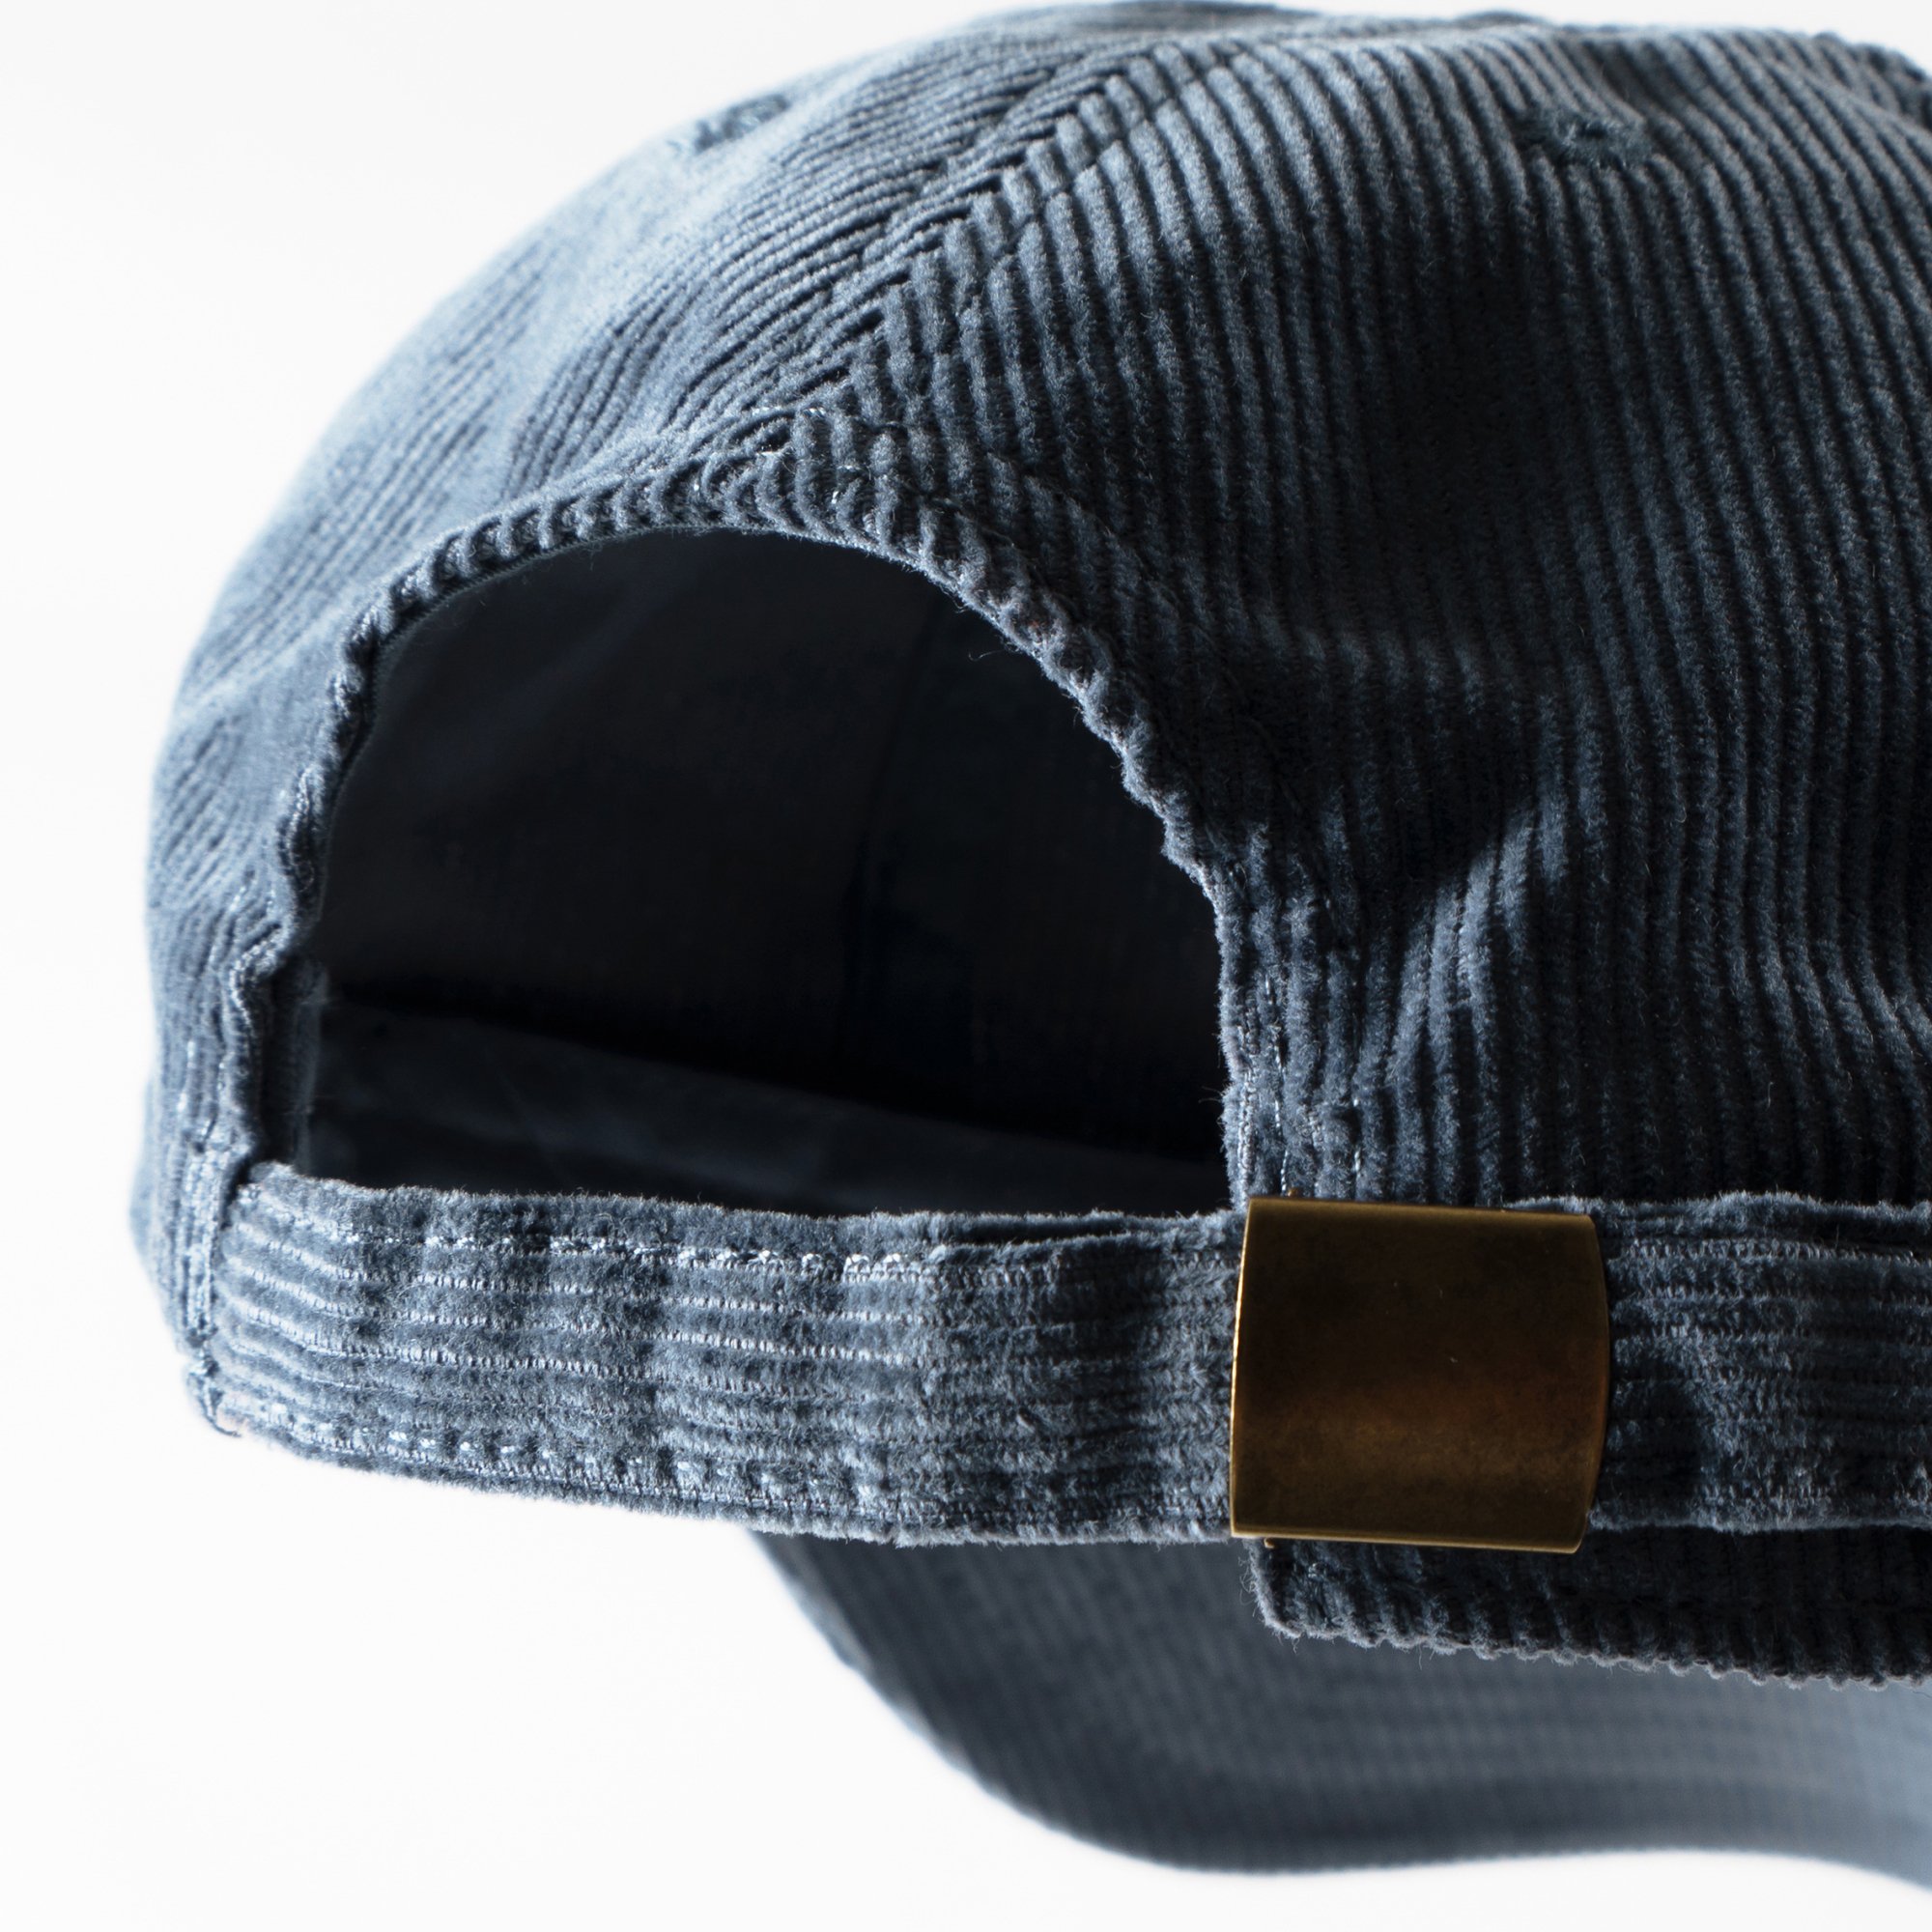 BLUFCAMP<br />Embroidered Corduroy CAP / Smoke Blue<img class='new_mark_img2' src='https://img.shop-pro.jp/img/new/icons14.gif' style='border:none;display:inline;margin:0px;padding:0px;width:auto;' />